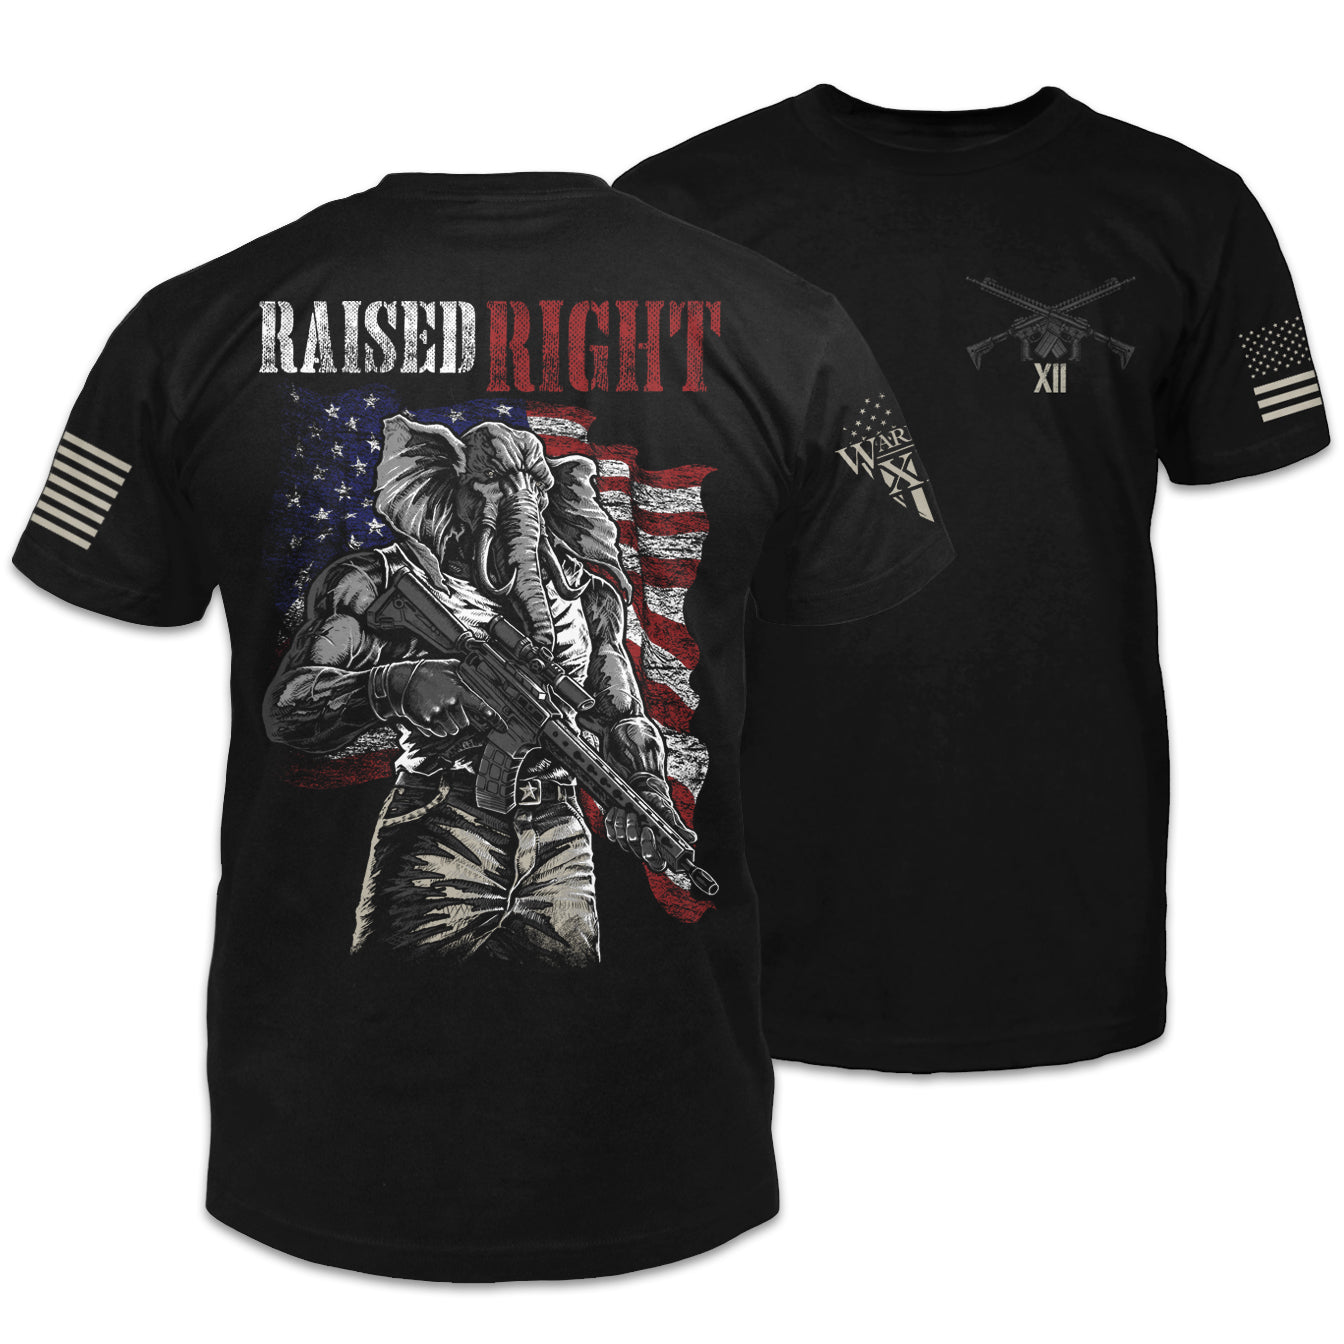 Front & back black t-shirt with the words "Raised Right" with an elephant holding a gun in front of the American flag printed on the shirt.